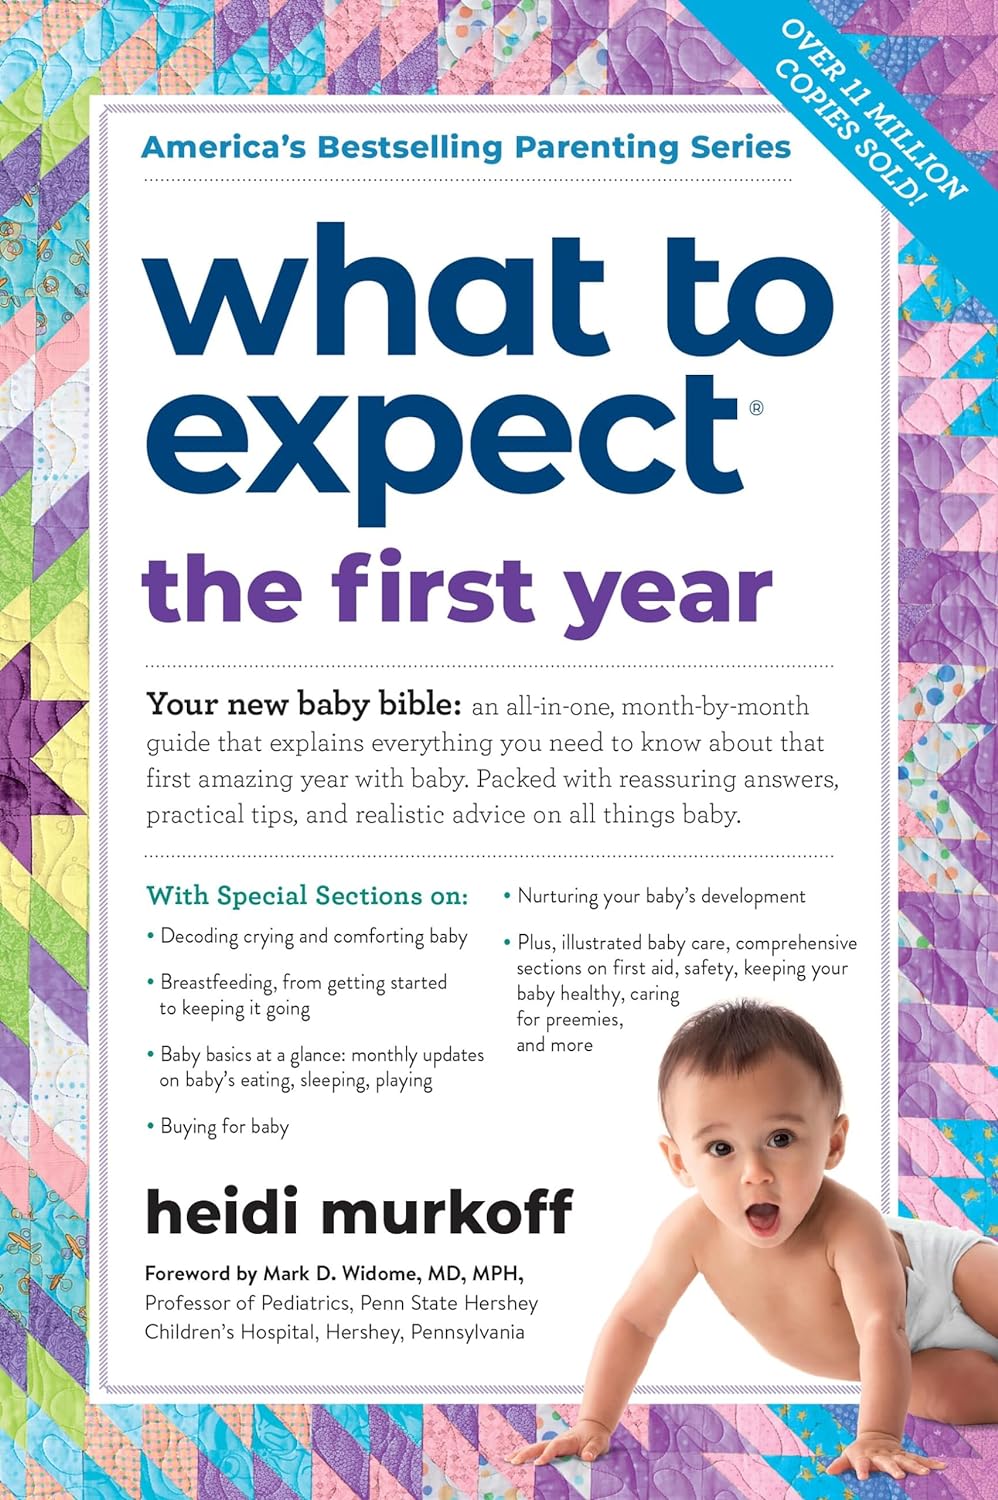 What to Expect the First Year by Heidi Murkoff